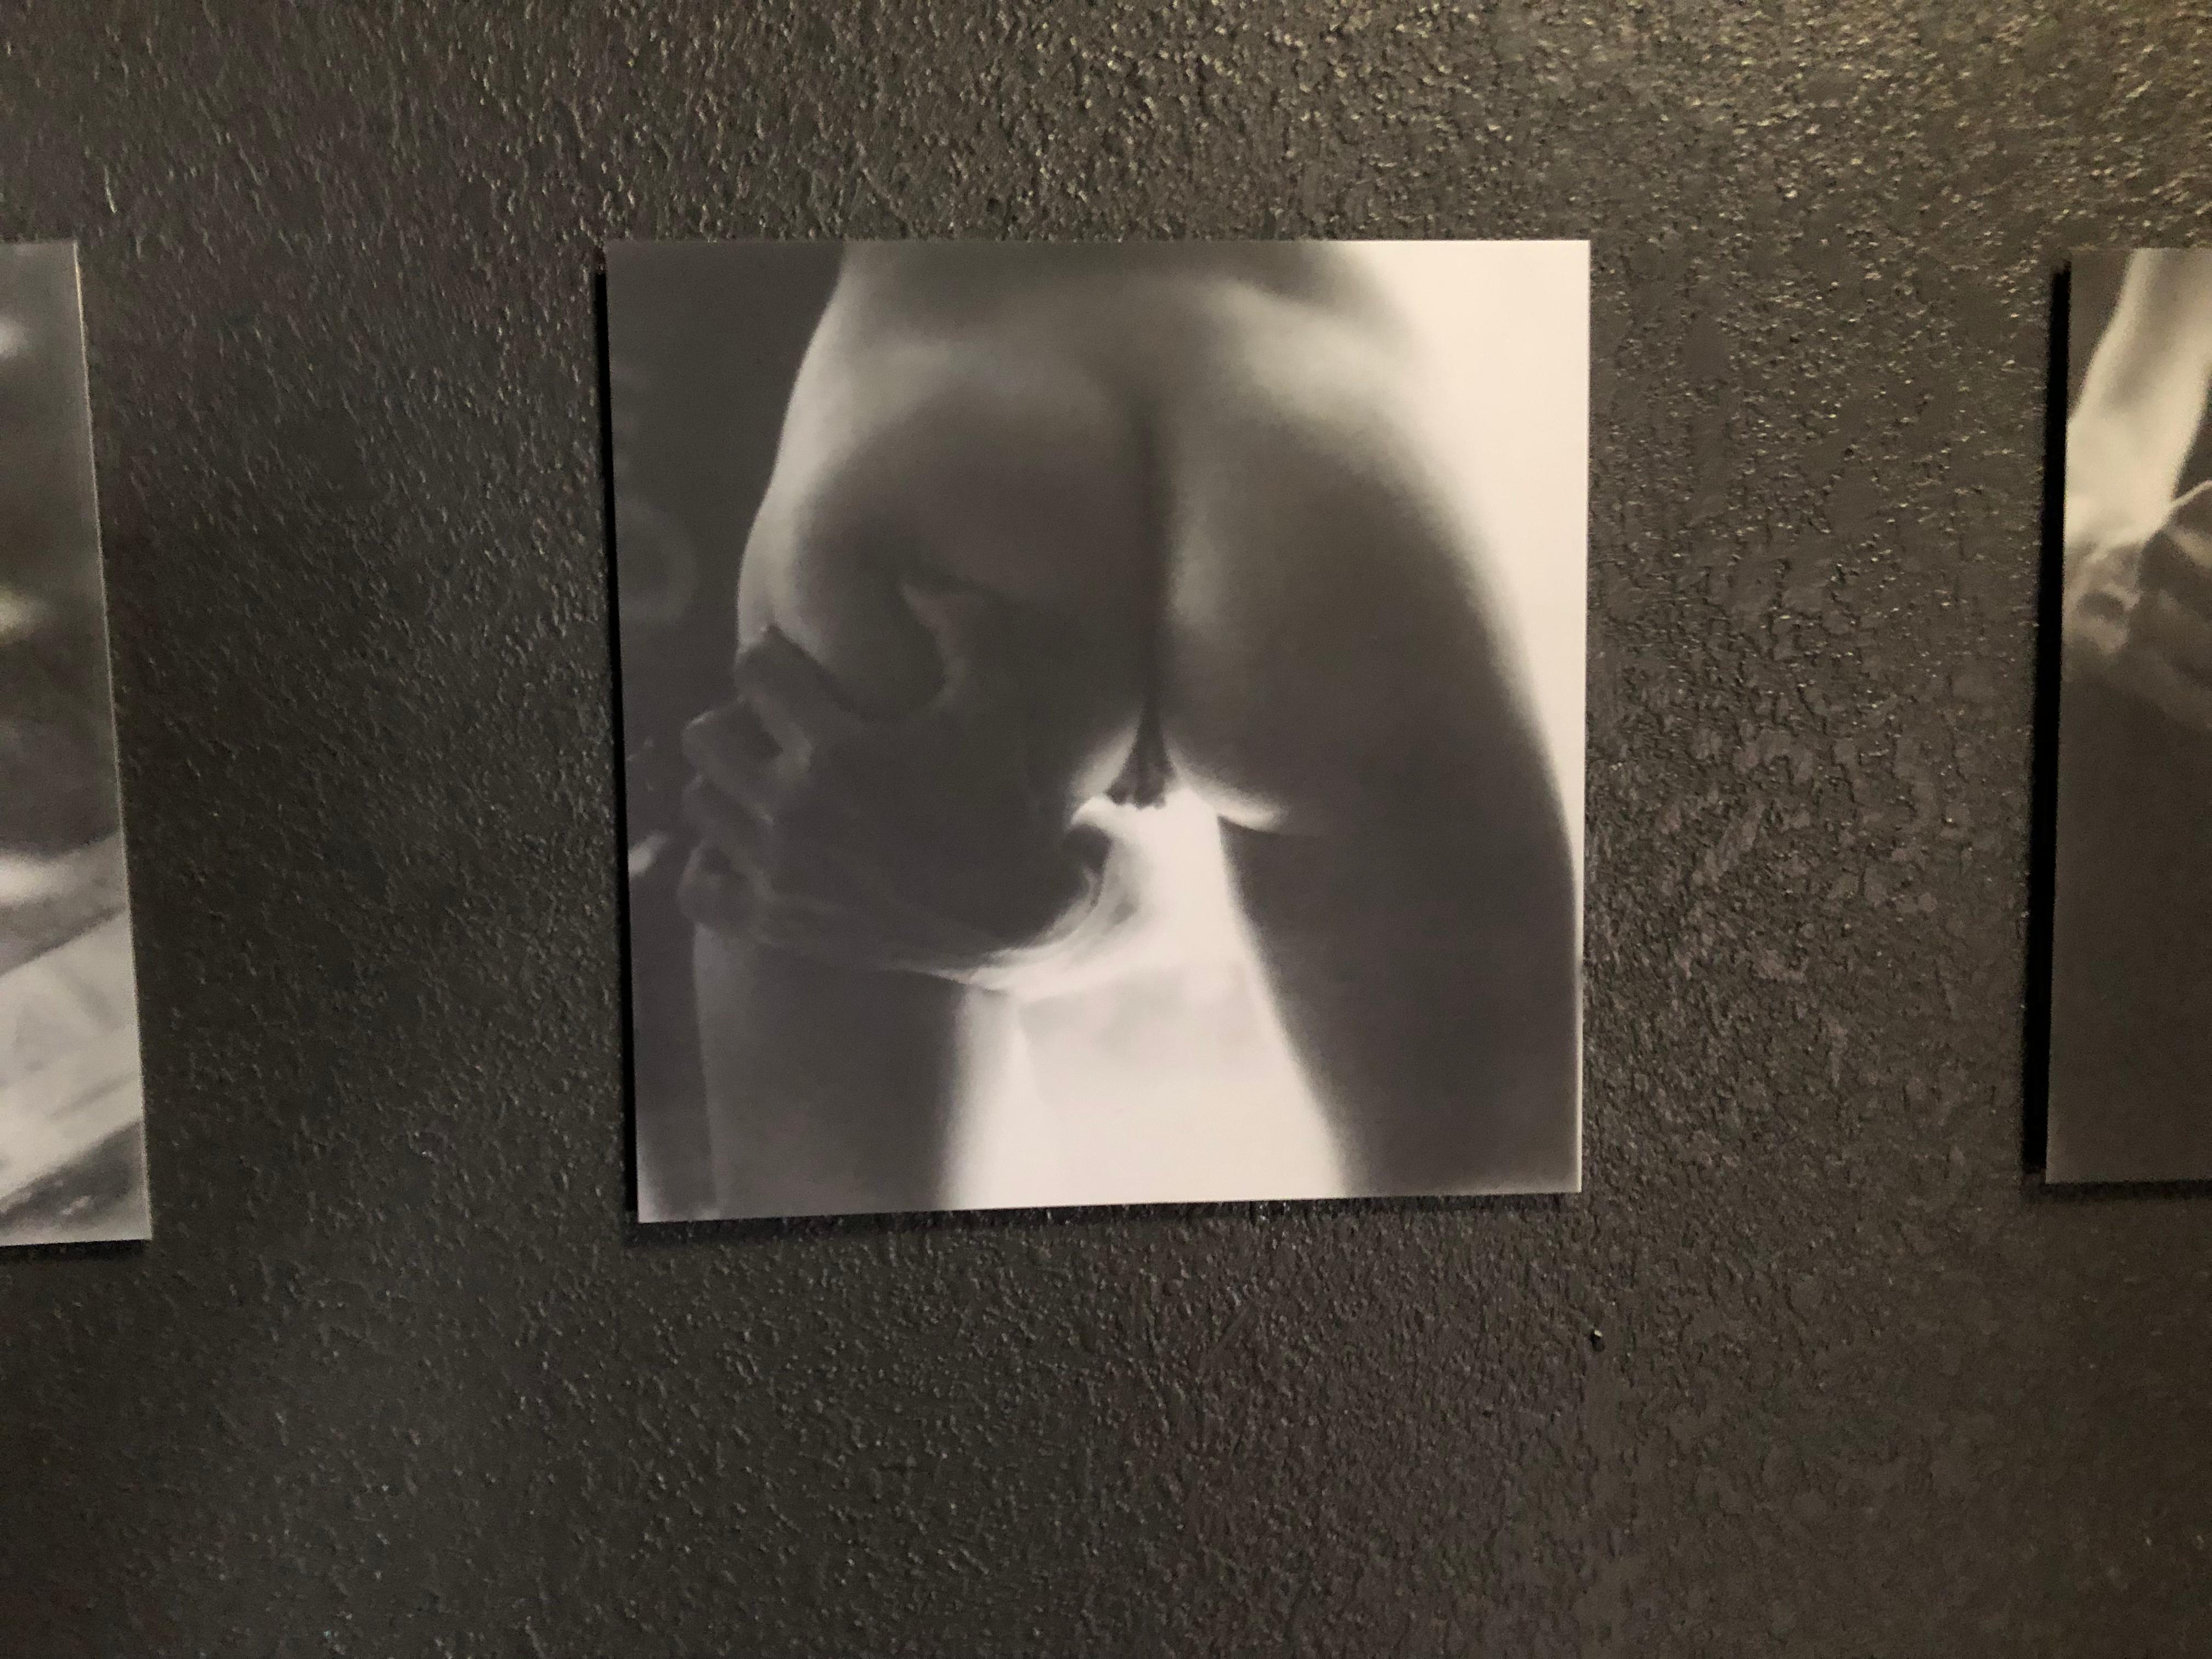 'Cradle' part of the series 'Hands down' - 2019 

50x50cm, 
Edition of 7 plus 2 Artist Proofs, 
archival C-Print based on the Polaroid. 
Signature label and certificate. 
Artist inventory PL2019-505. 
Not mounted. 

This piece is part of Kirsten's